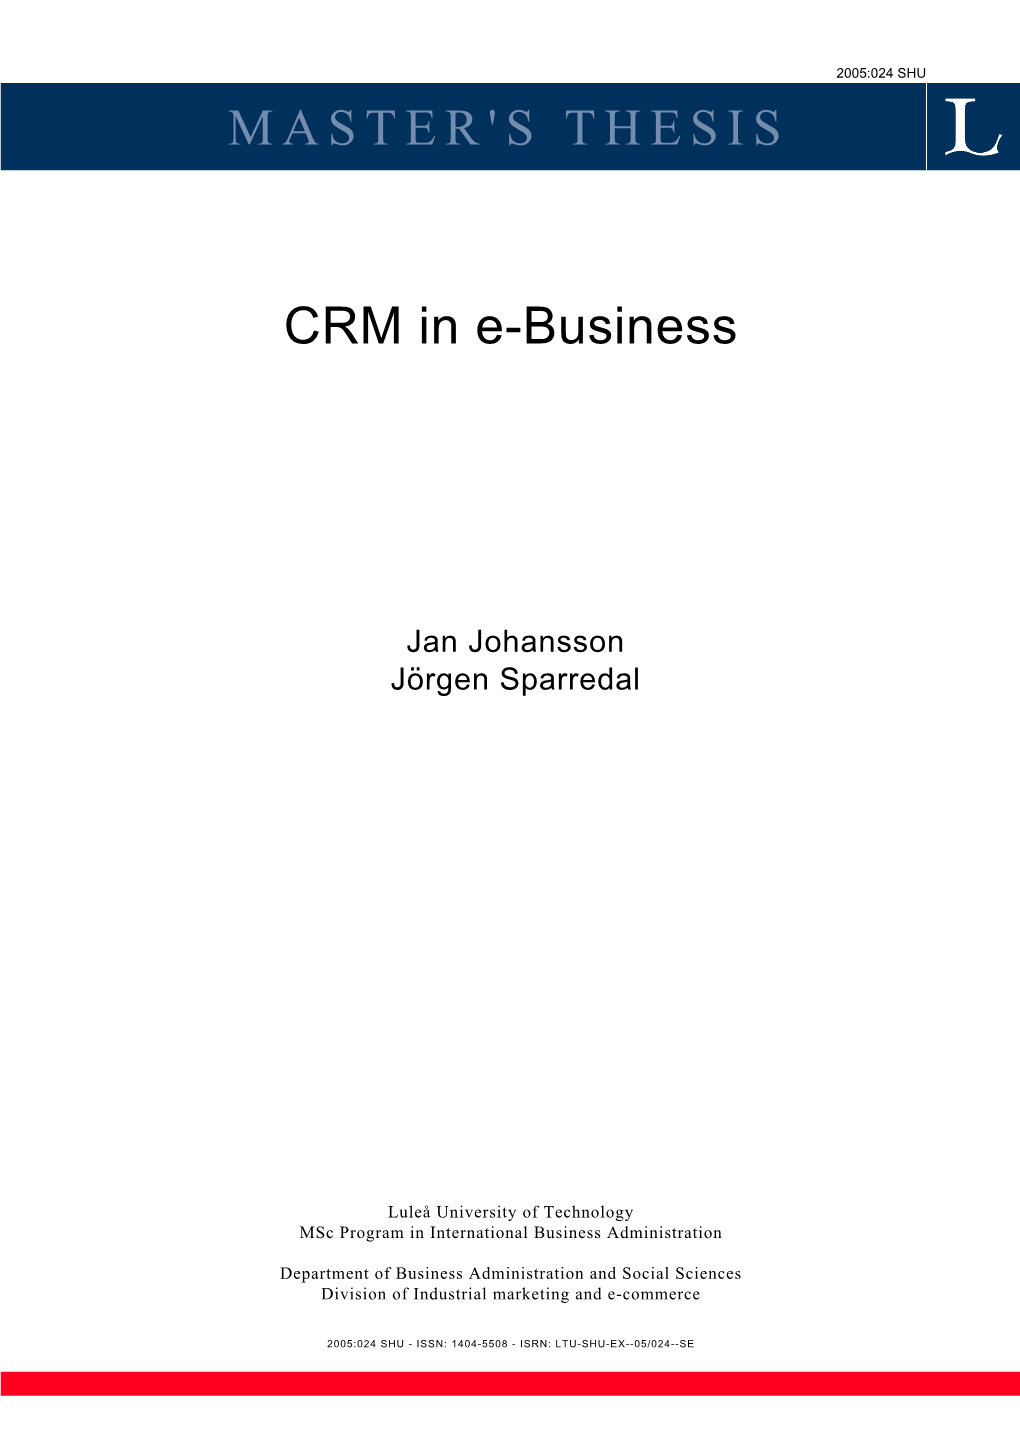 CRM in E-Business